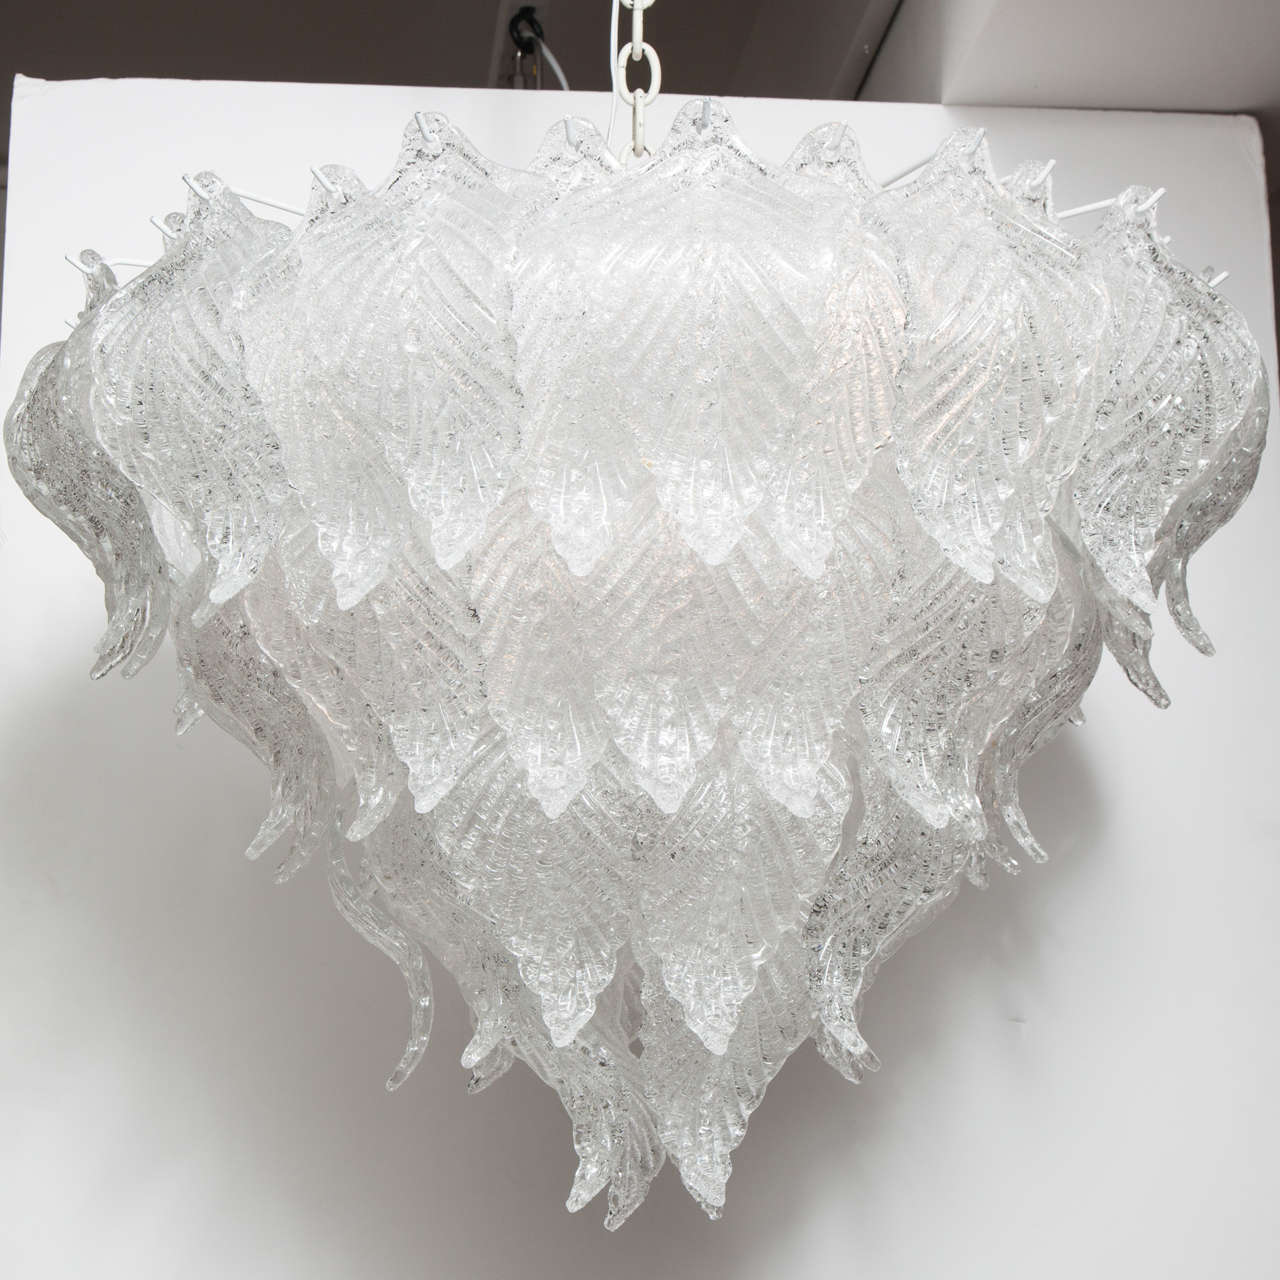 The glasses are handblown and feature leaves.
The structure is white metal.
The chandelier has been American wired